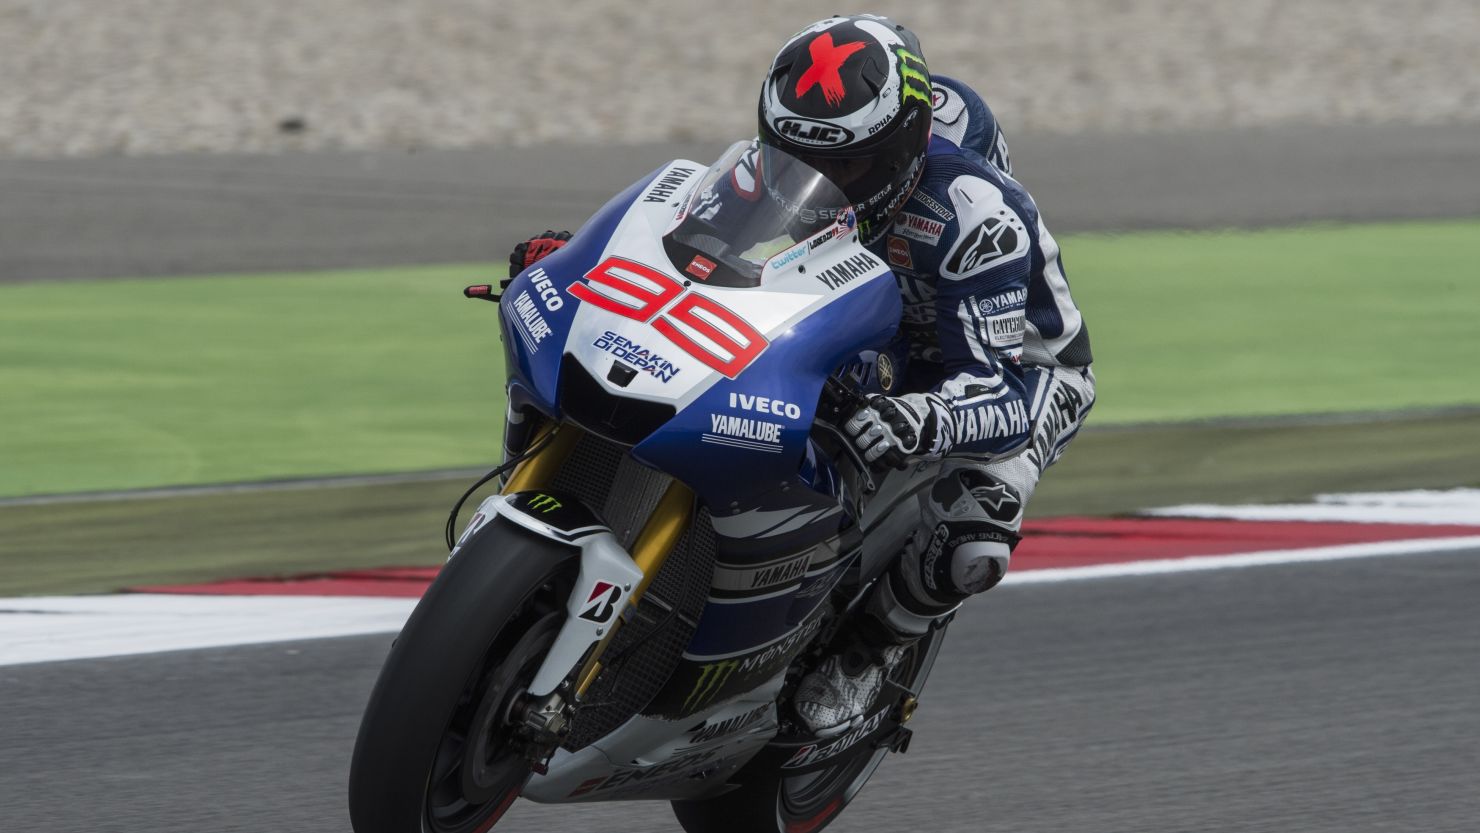 Jorge Lorenzo will miss this weekend's Dutch MotoGP after falling from his bike during Thursday's practice session.